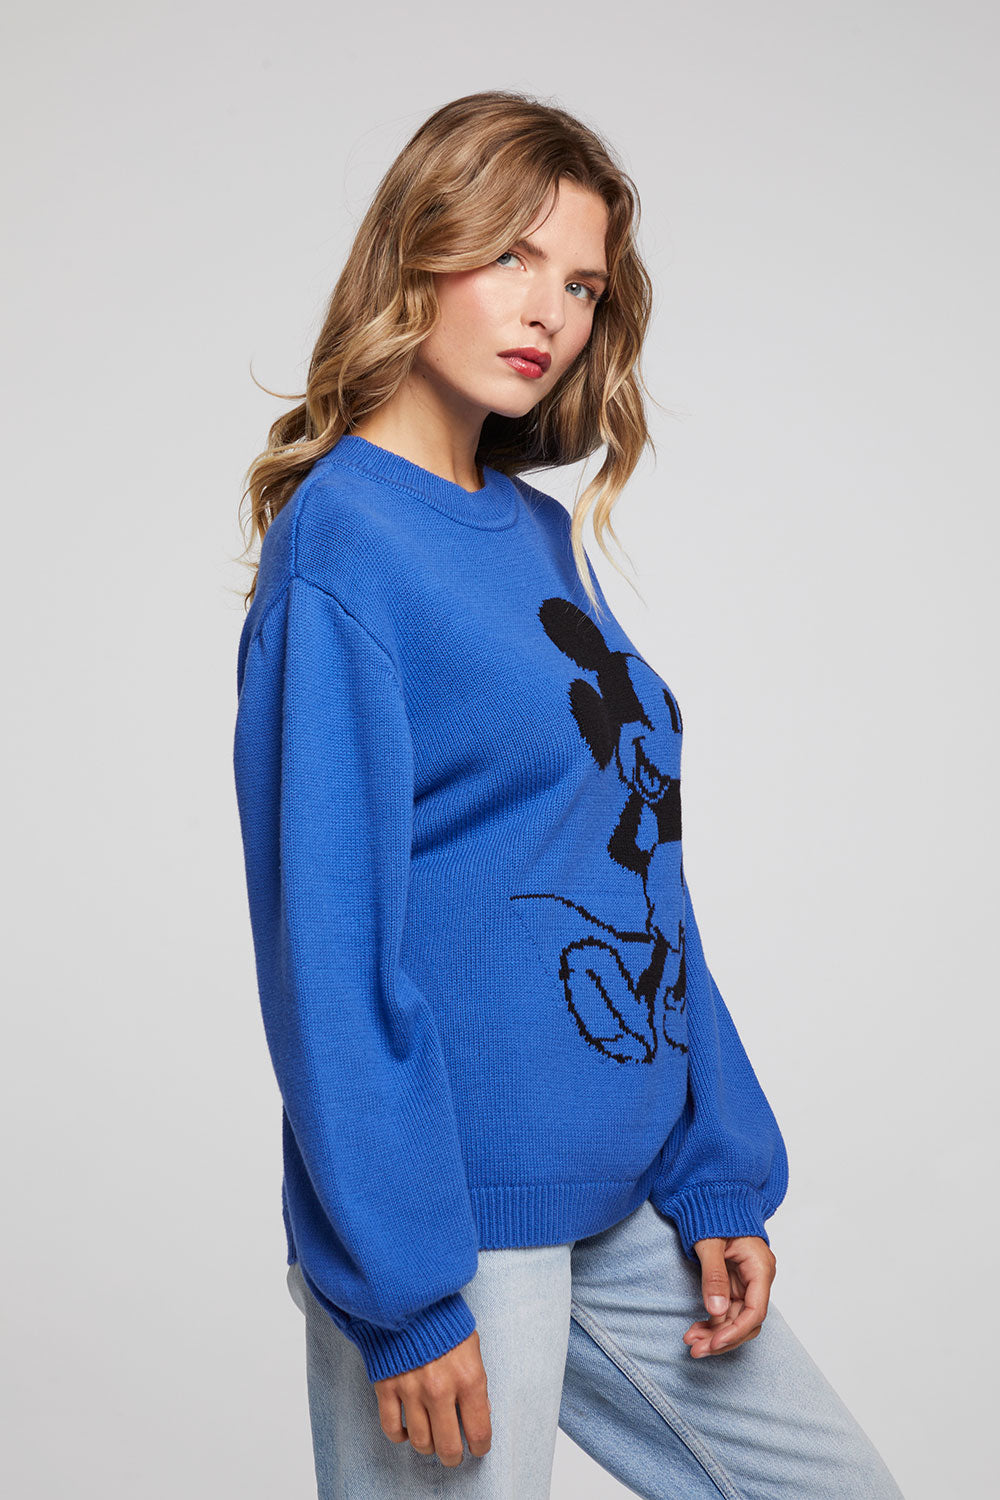 DisneyMickey Mouse Pullover Sweater WOMENS chaserbrand